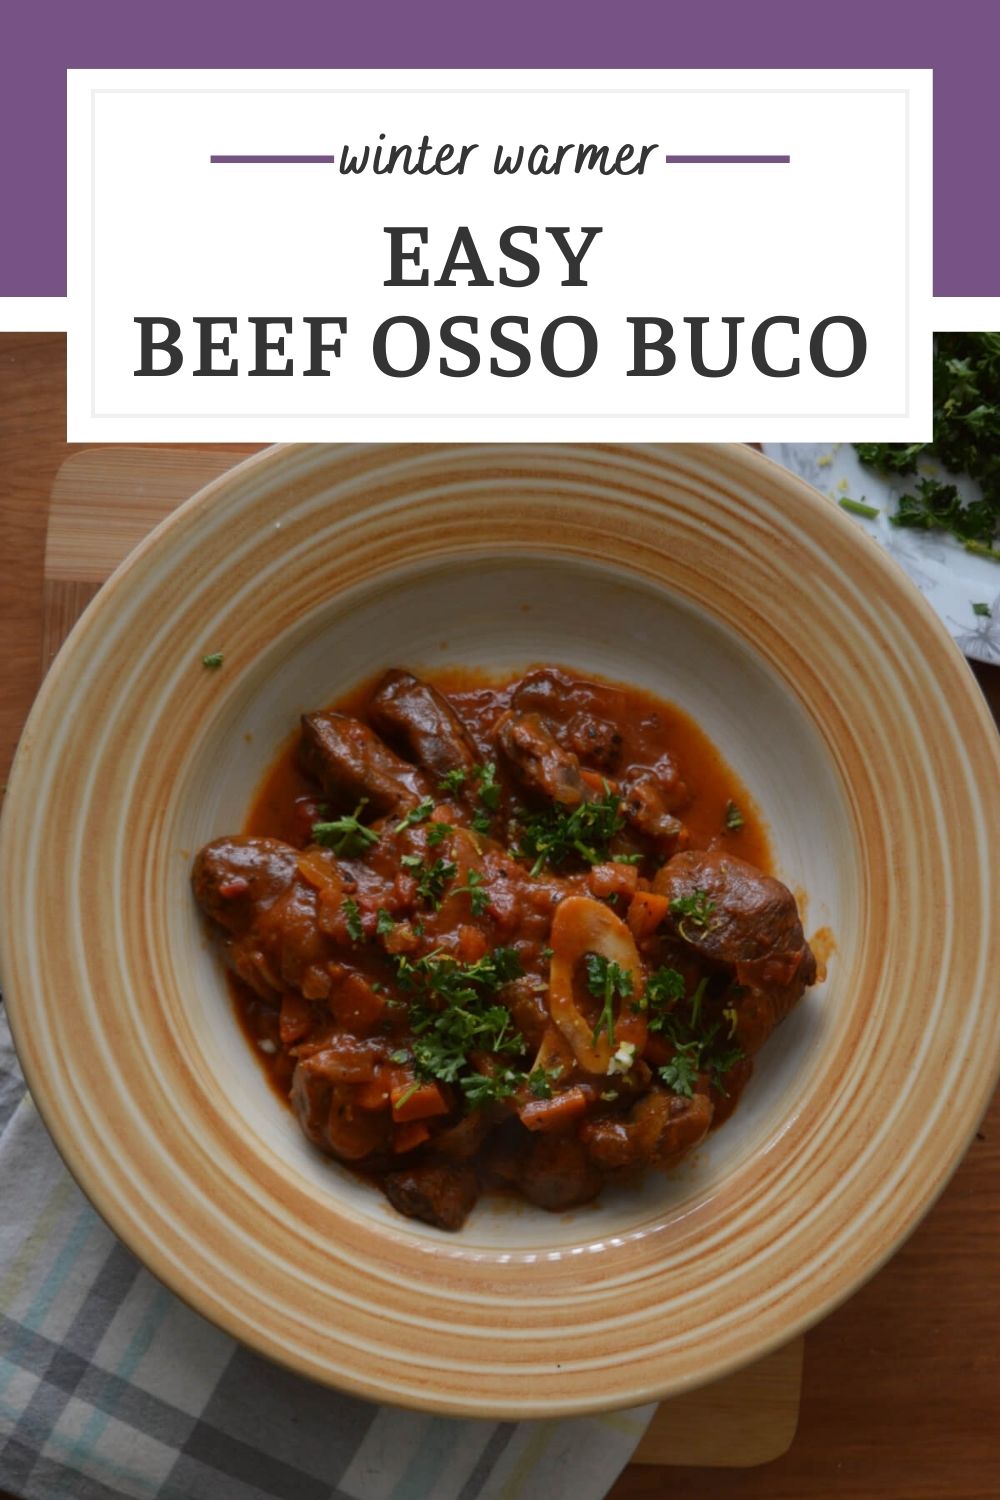 Beef Osso Buco is an easy and delicious dish which is perfect for a cold day